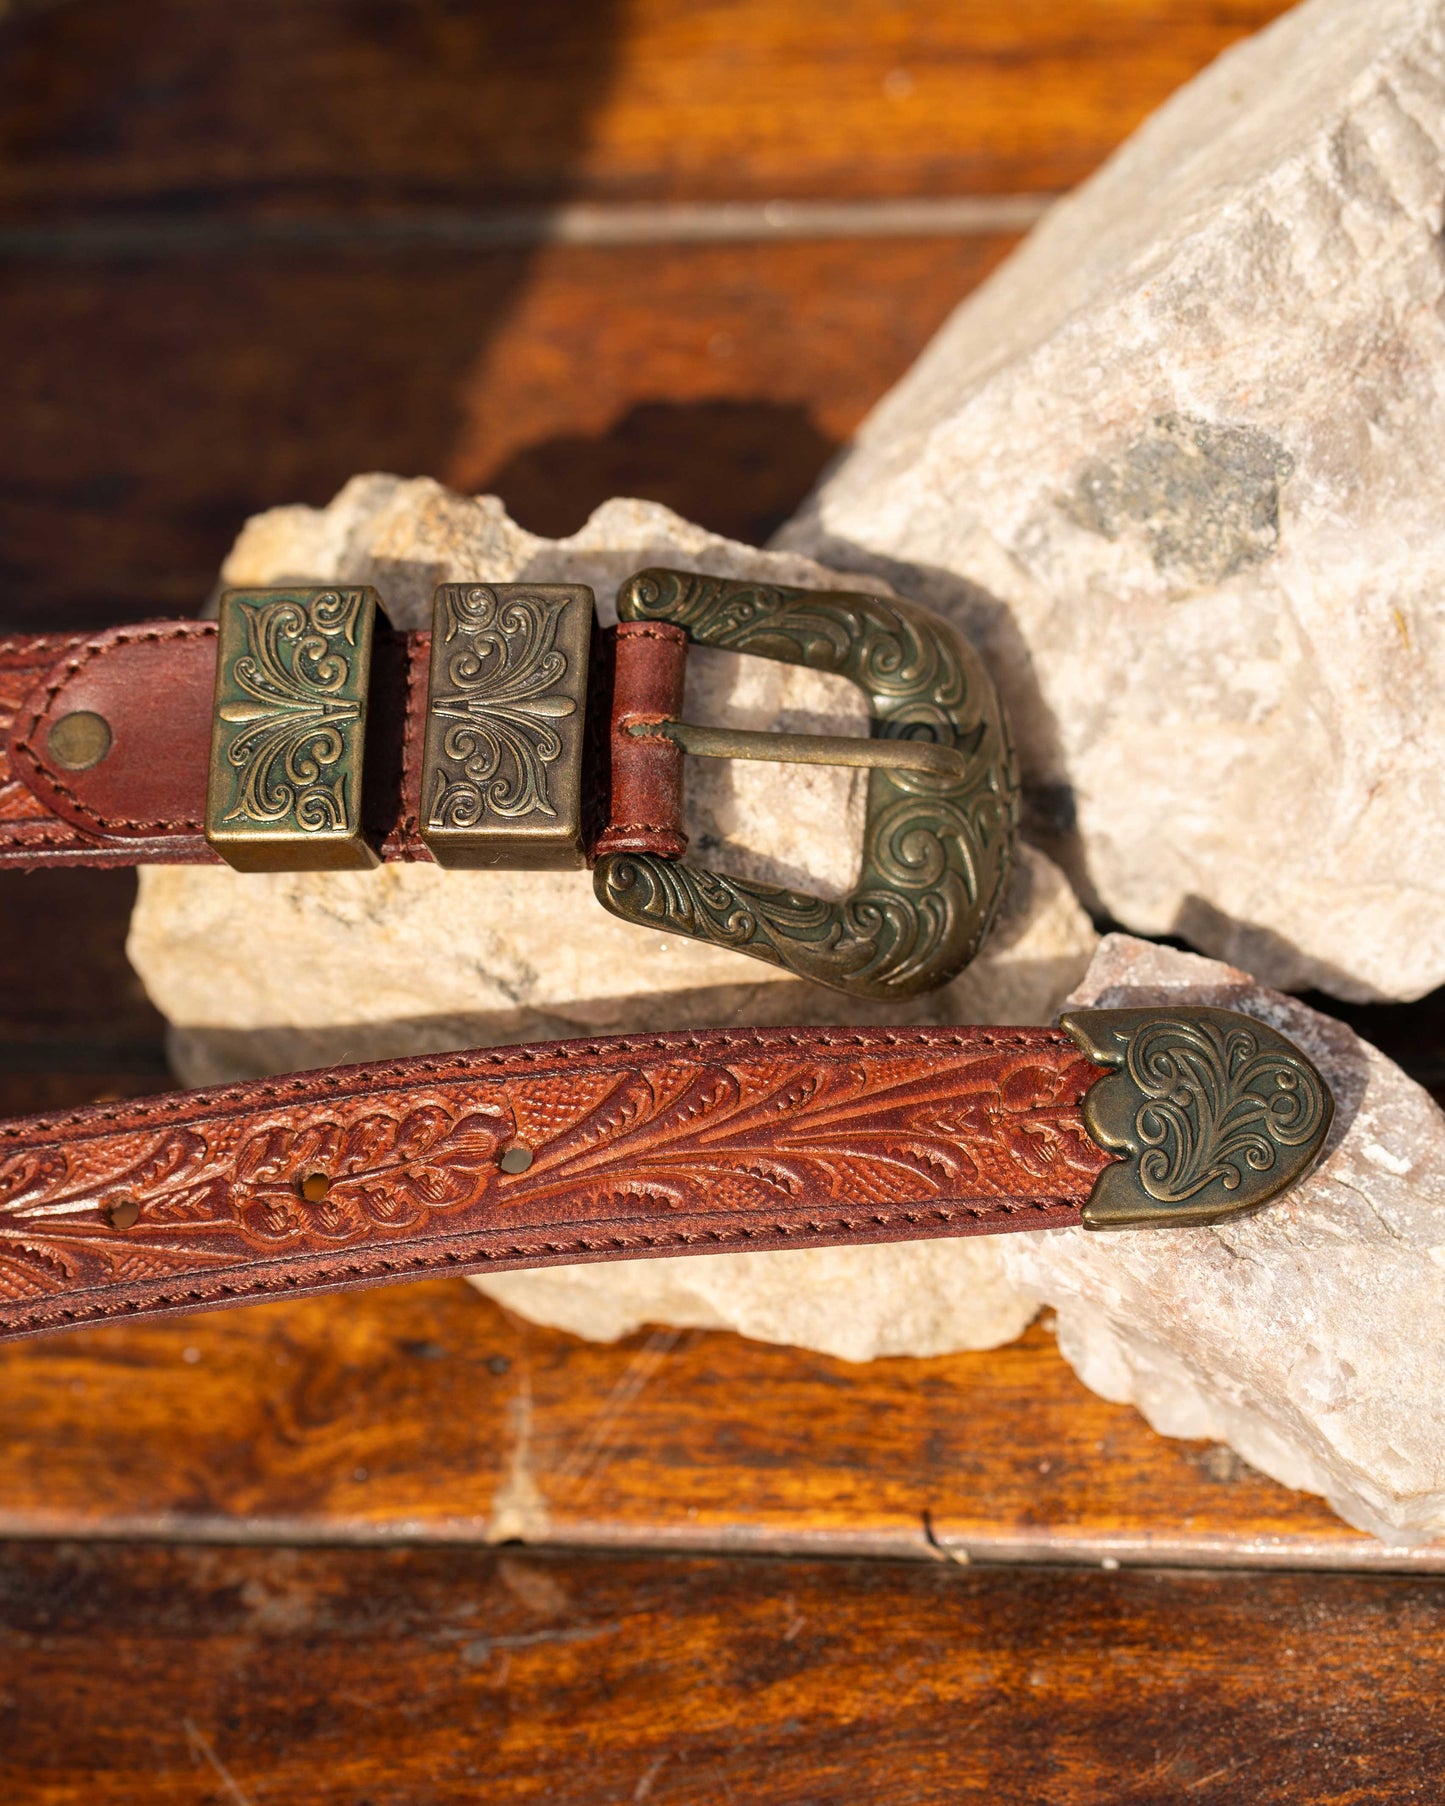 StacheMan's Red Wine Leather Tooled Belt